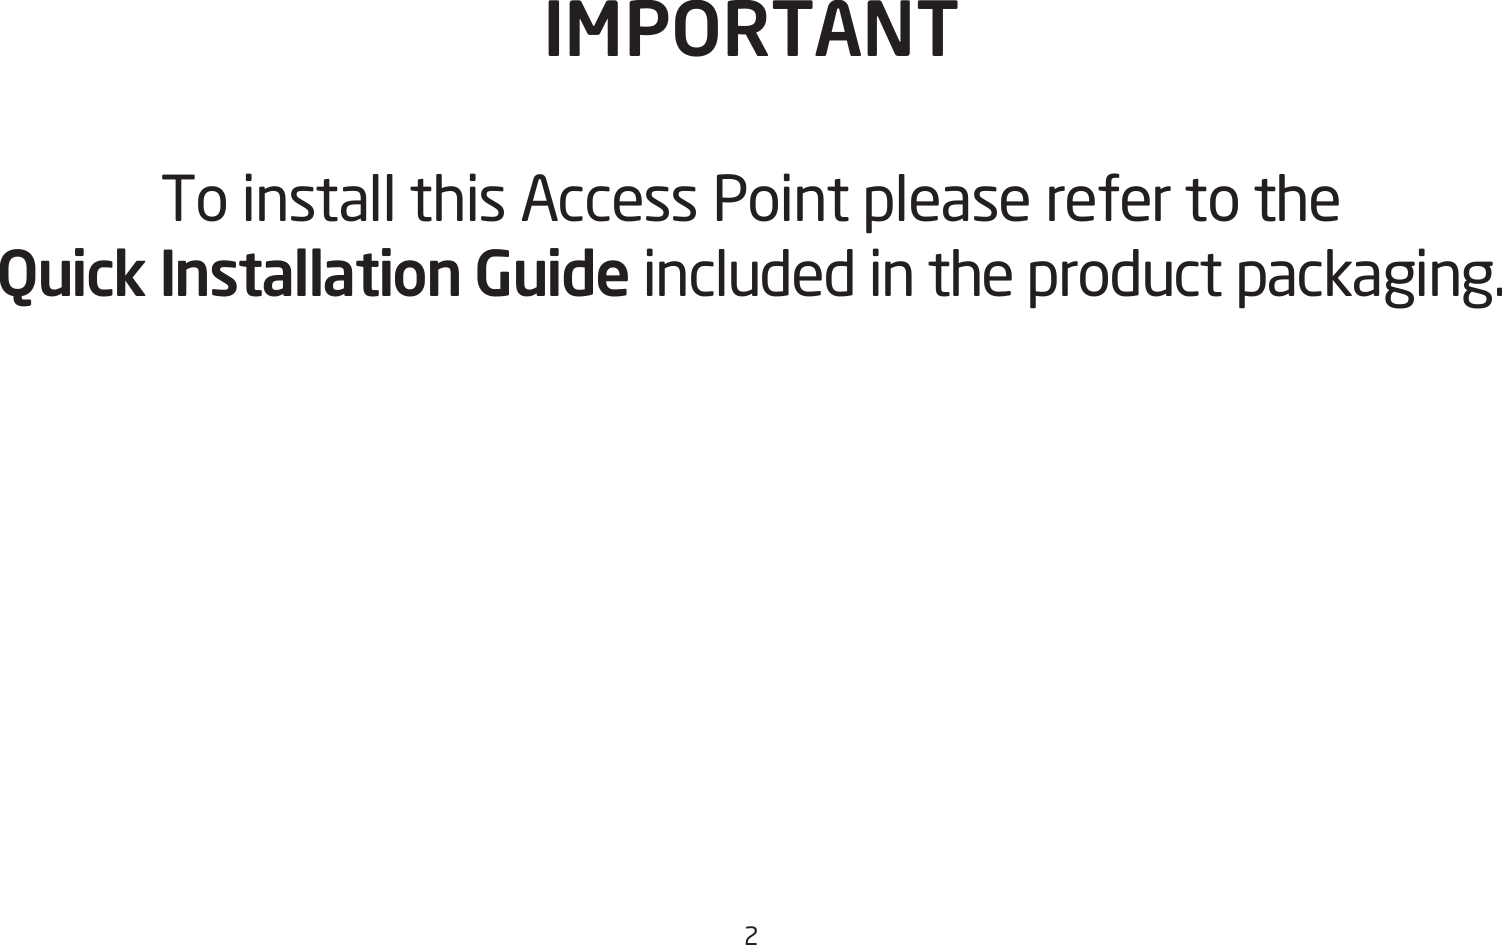 2IMPORTANTTo install this Access Point please refer to the  Quick Installation Guide included in the product packaging.